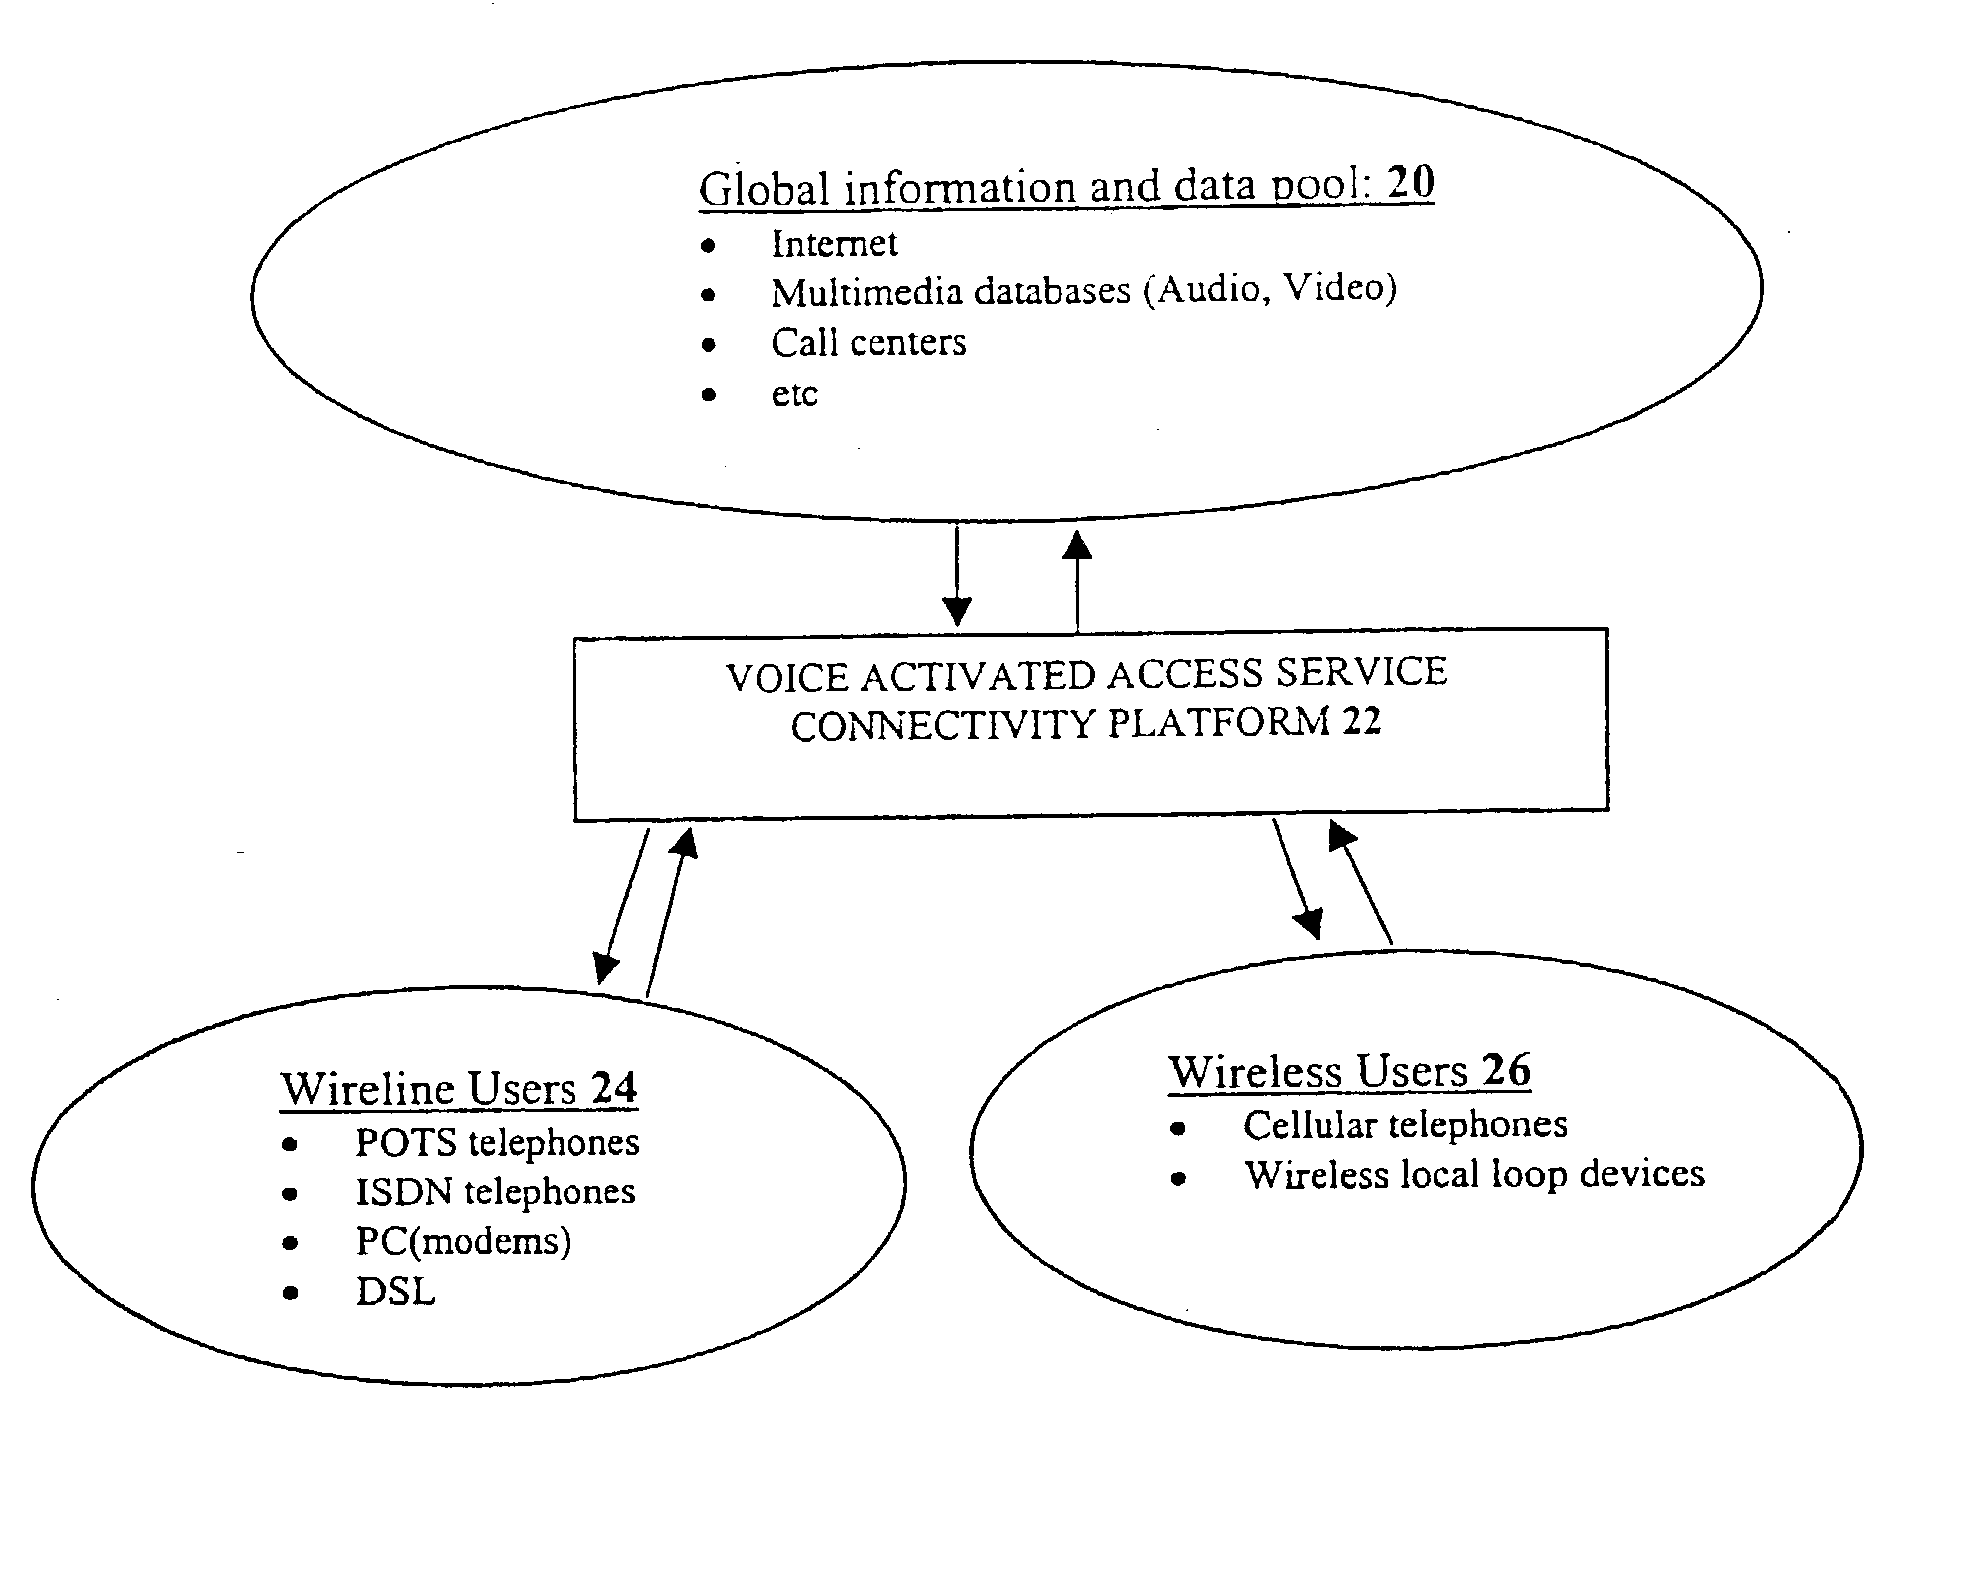 Method for voice activated network access